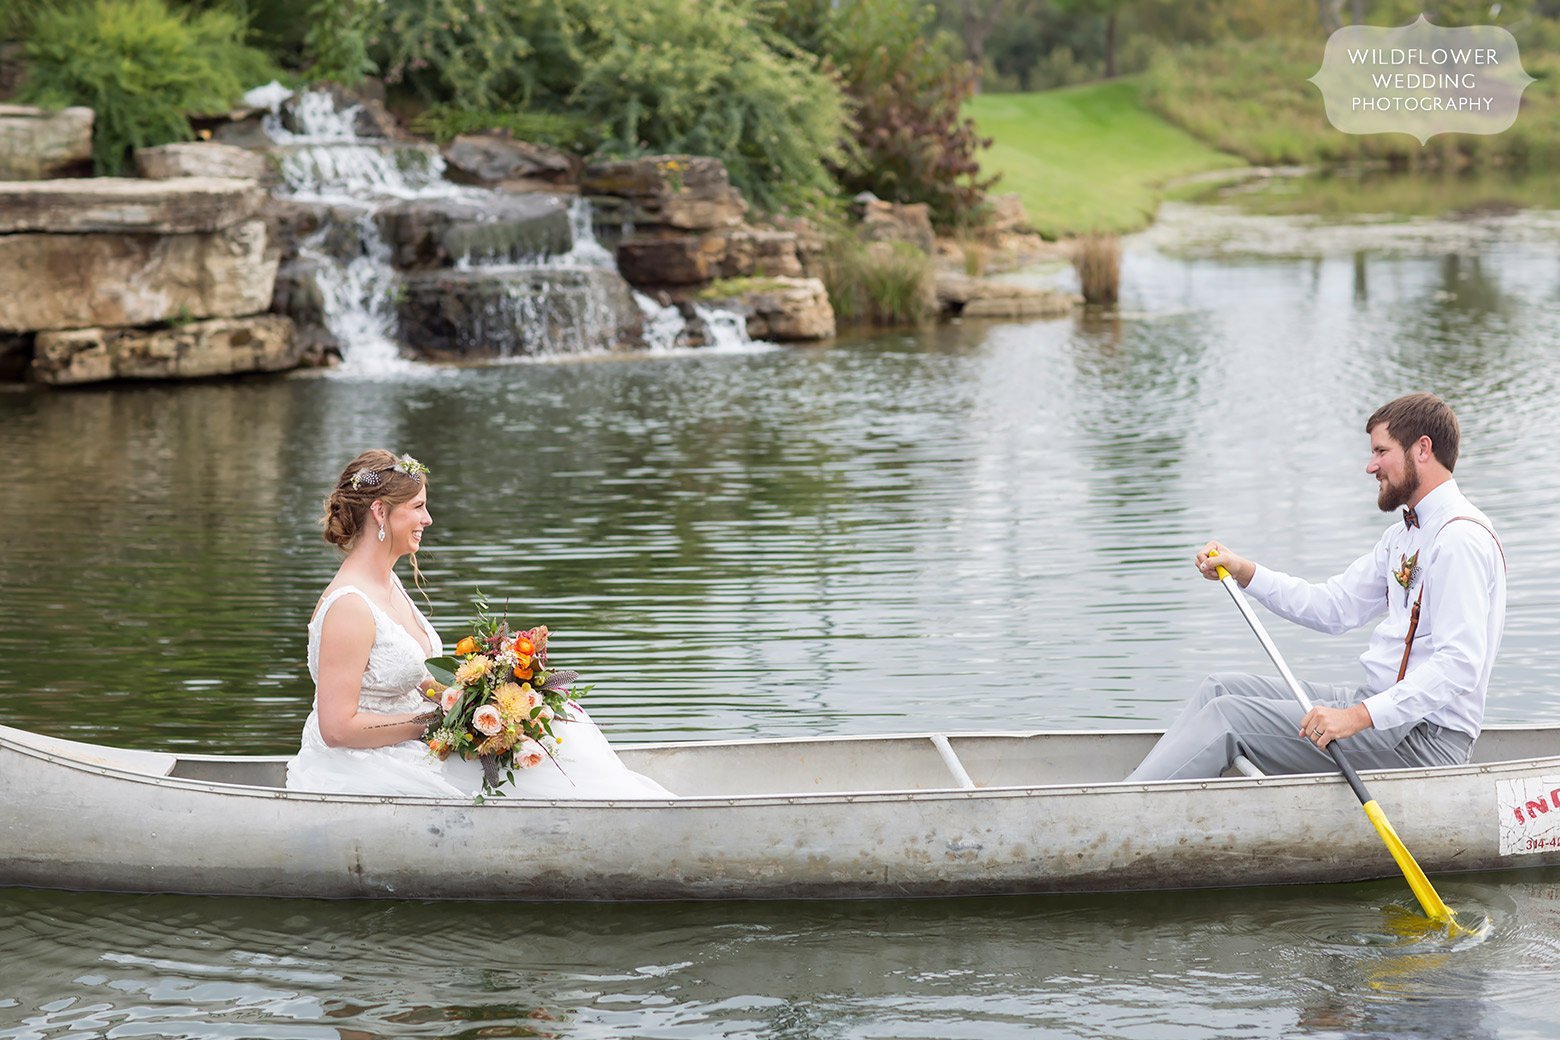 The bride and groom canoeing around a lake near Hermann, MO.